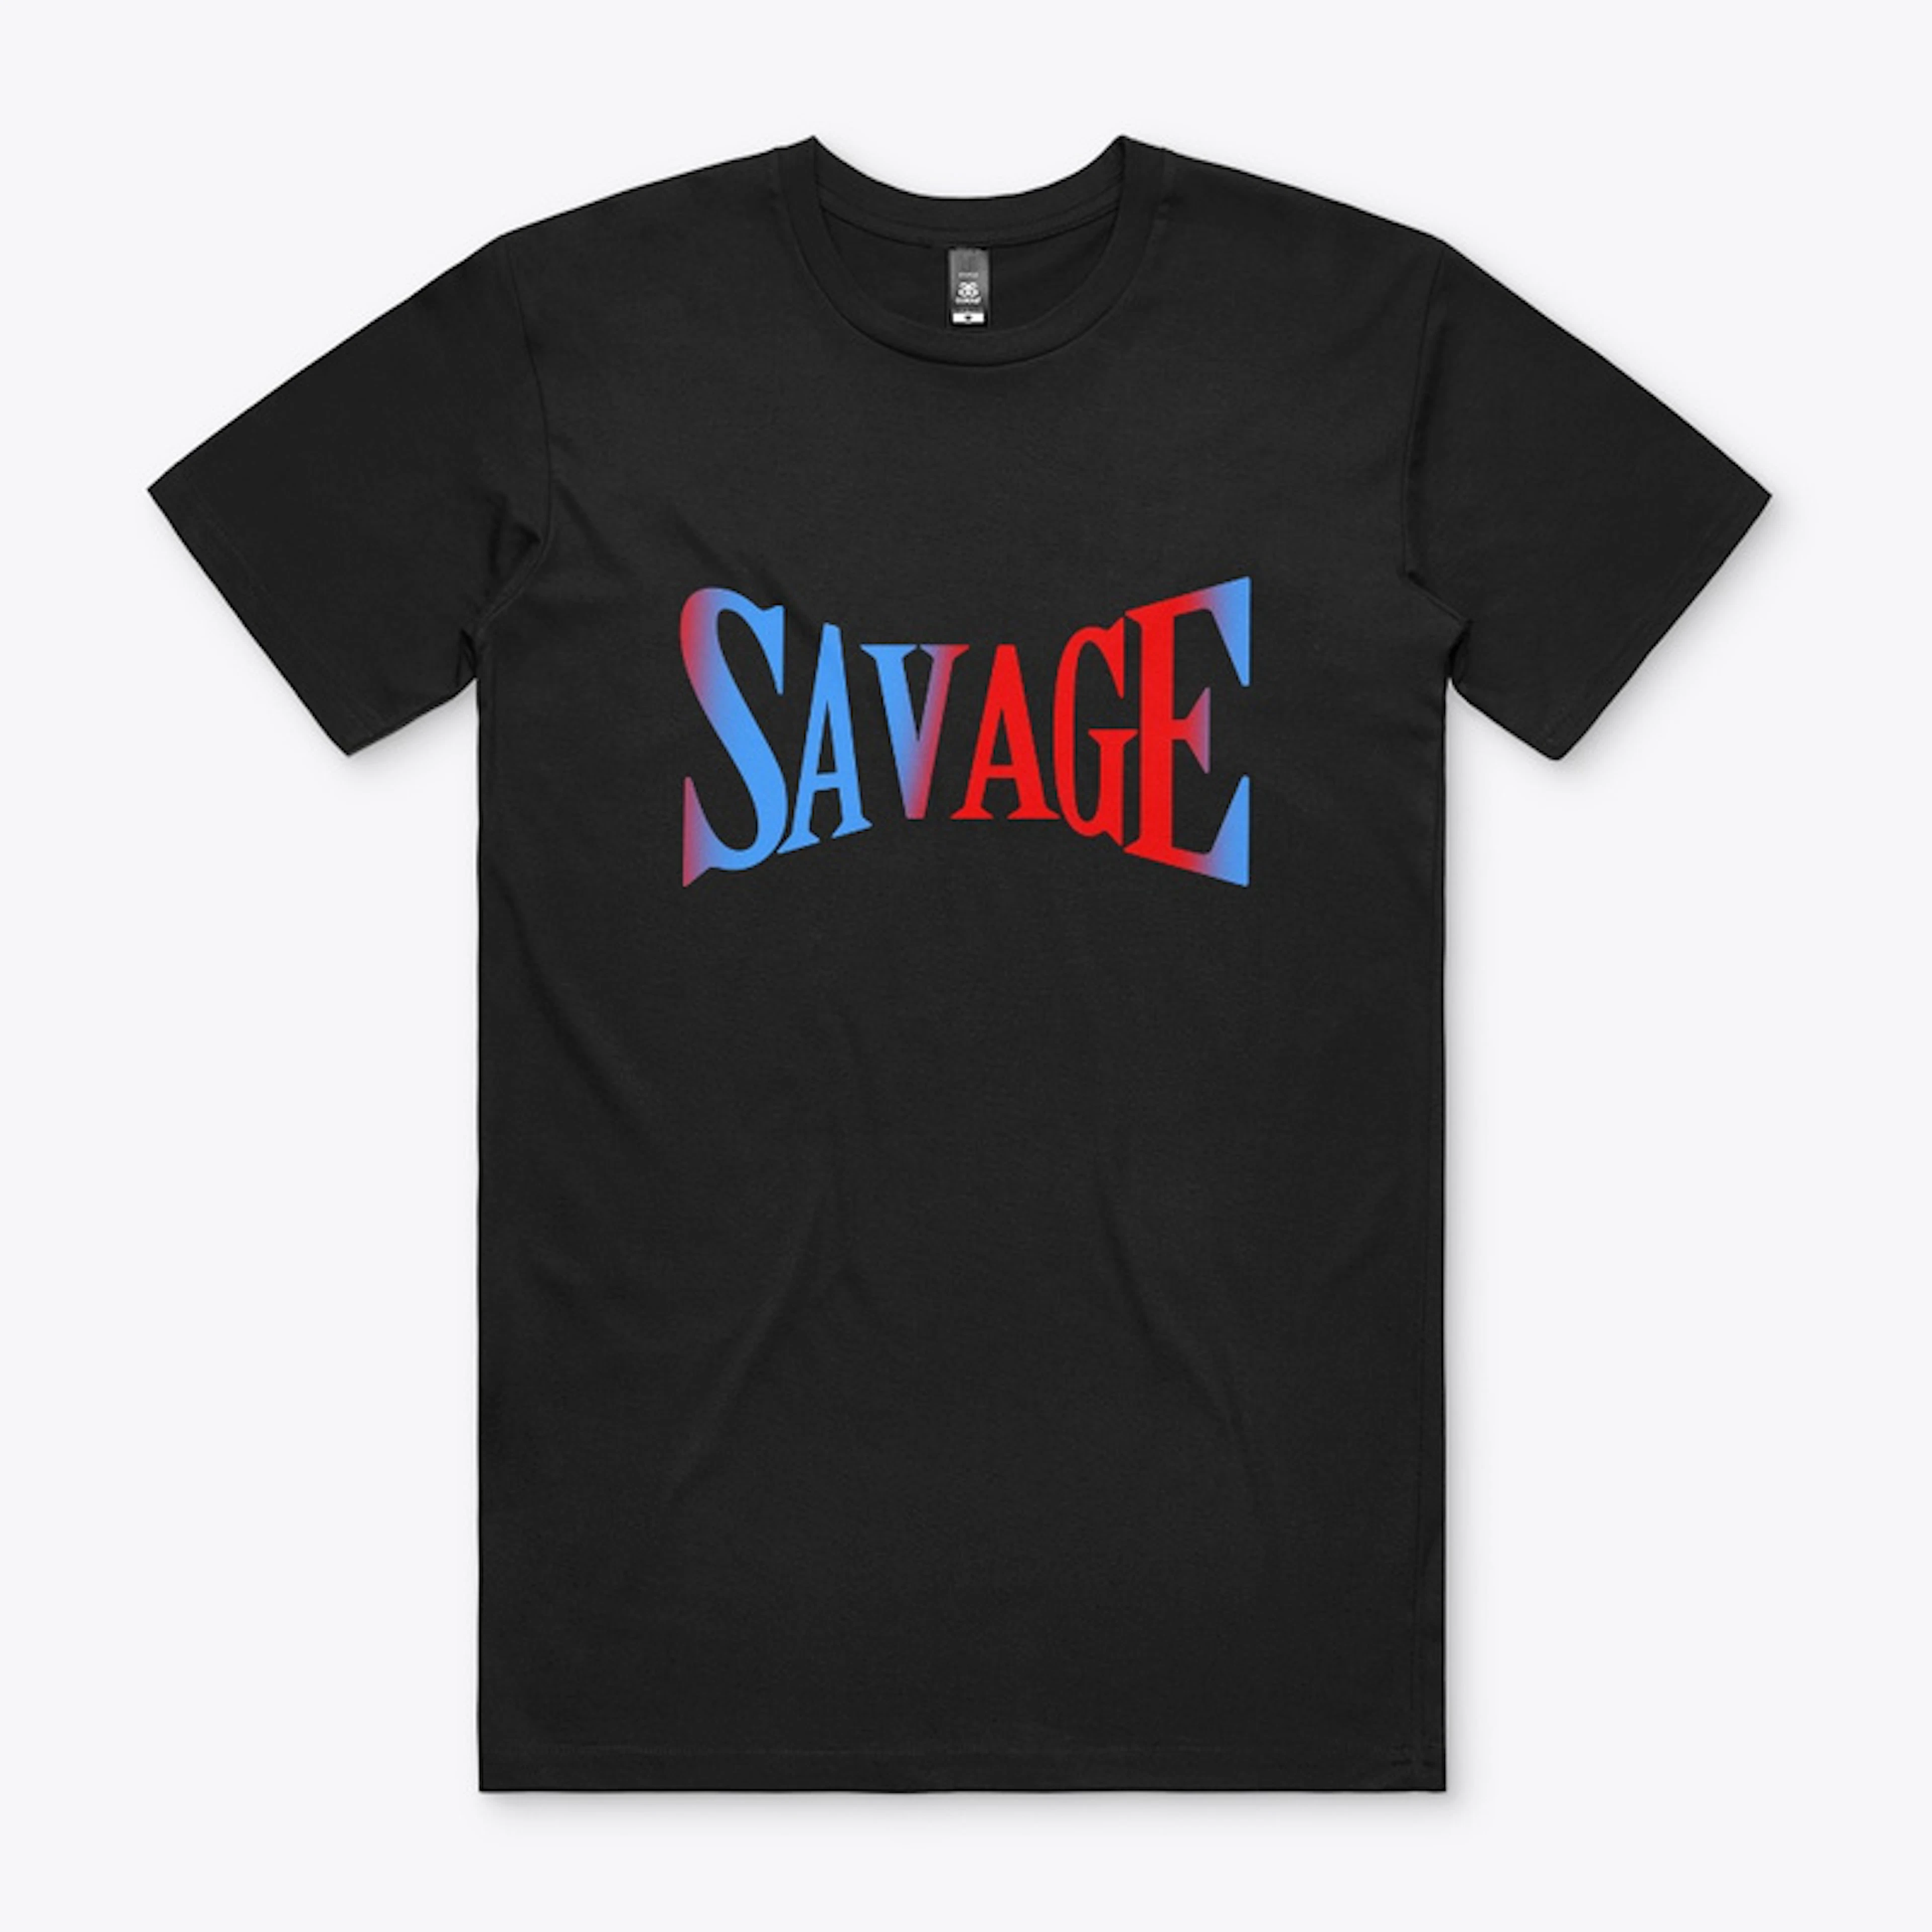 New Savage Design By Switch Teez